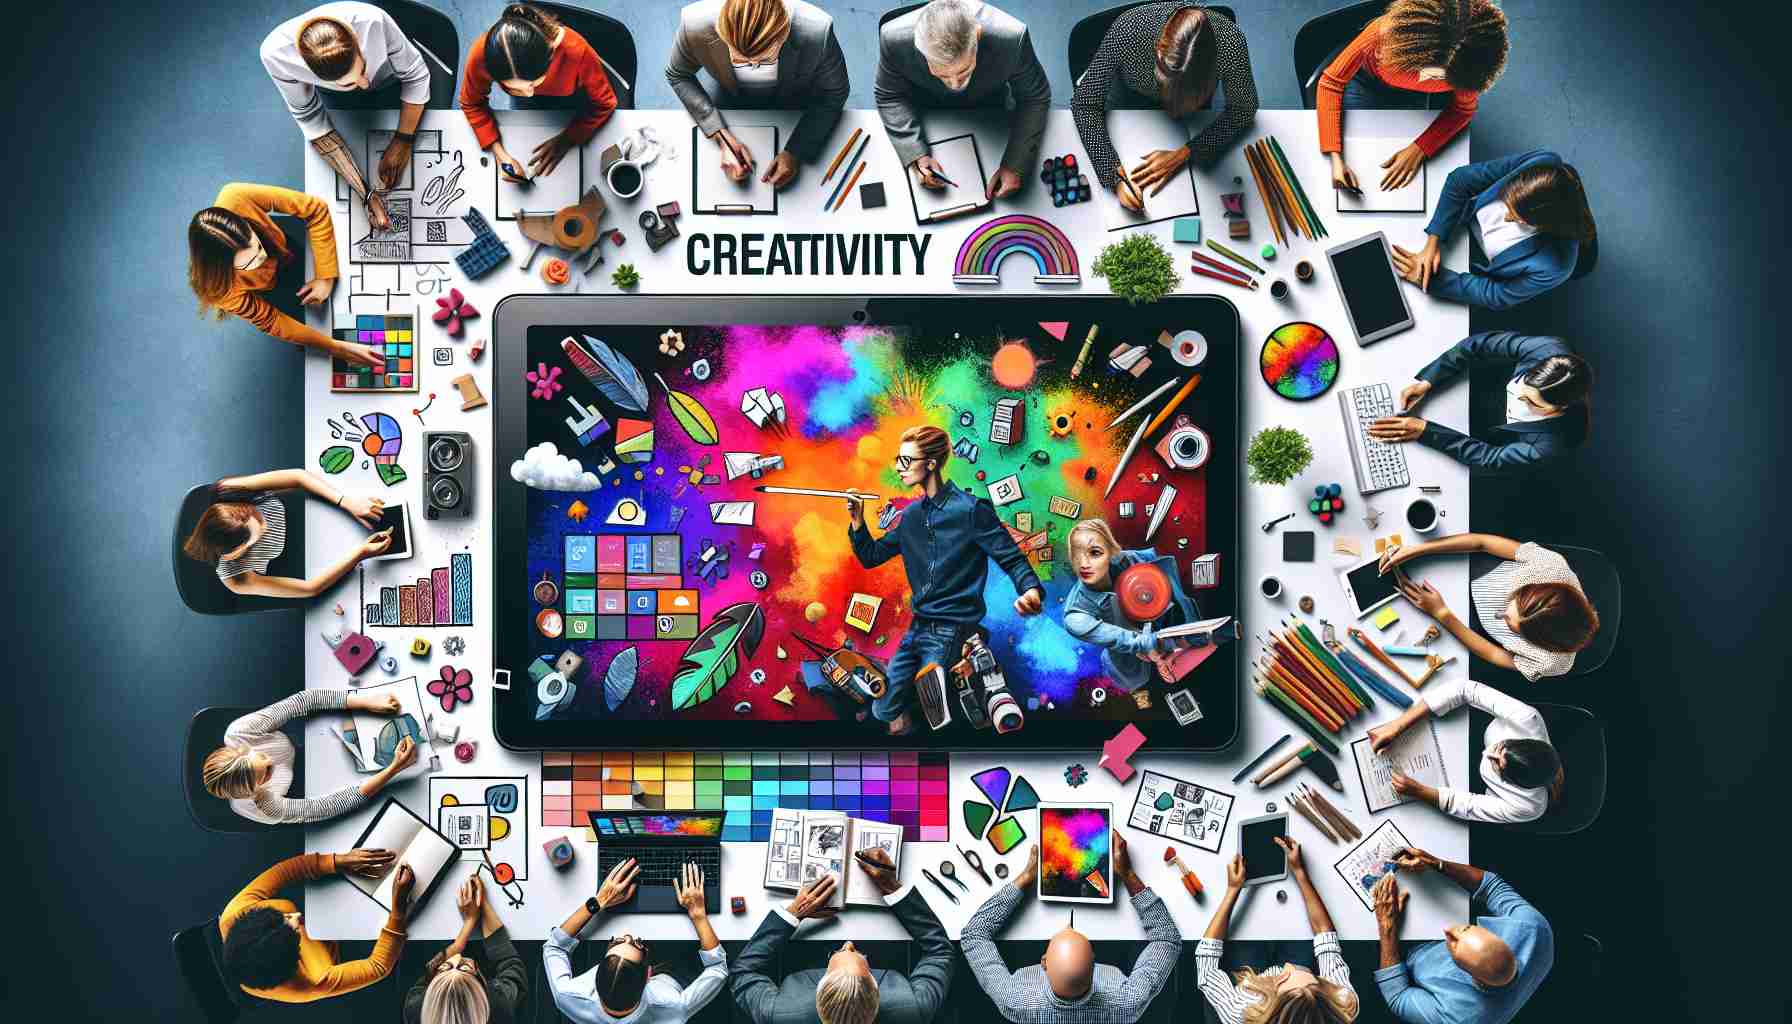 Samsung Celebrates Creativity with New Galaxy Tab S9 Commercial